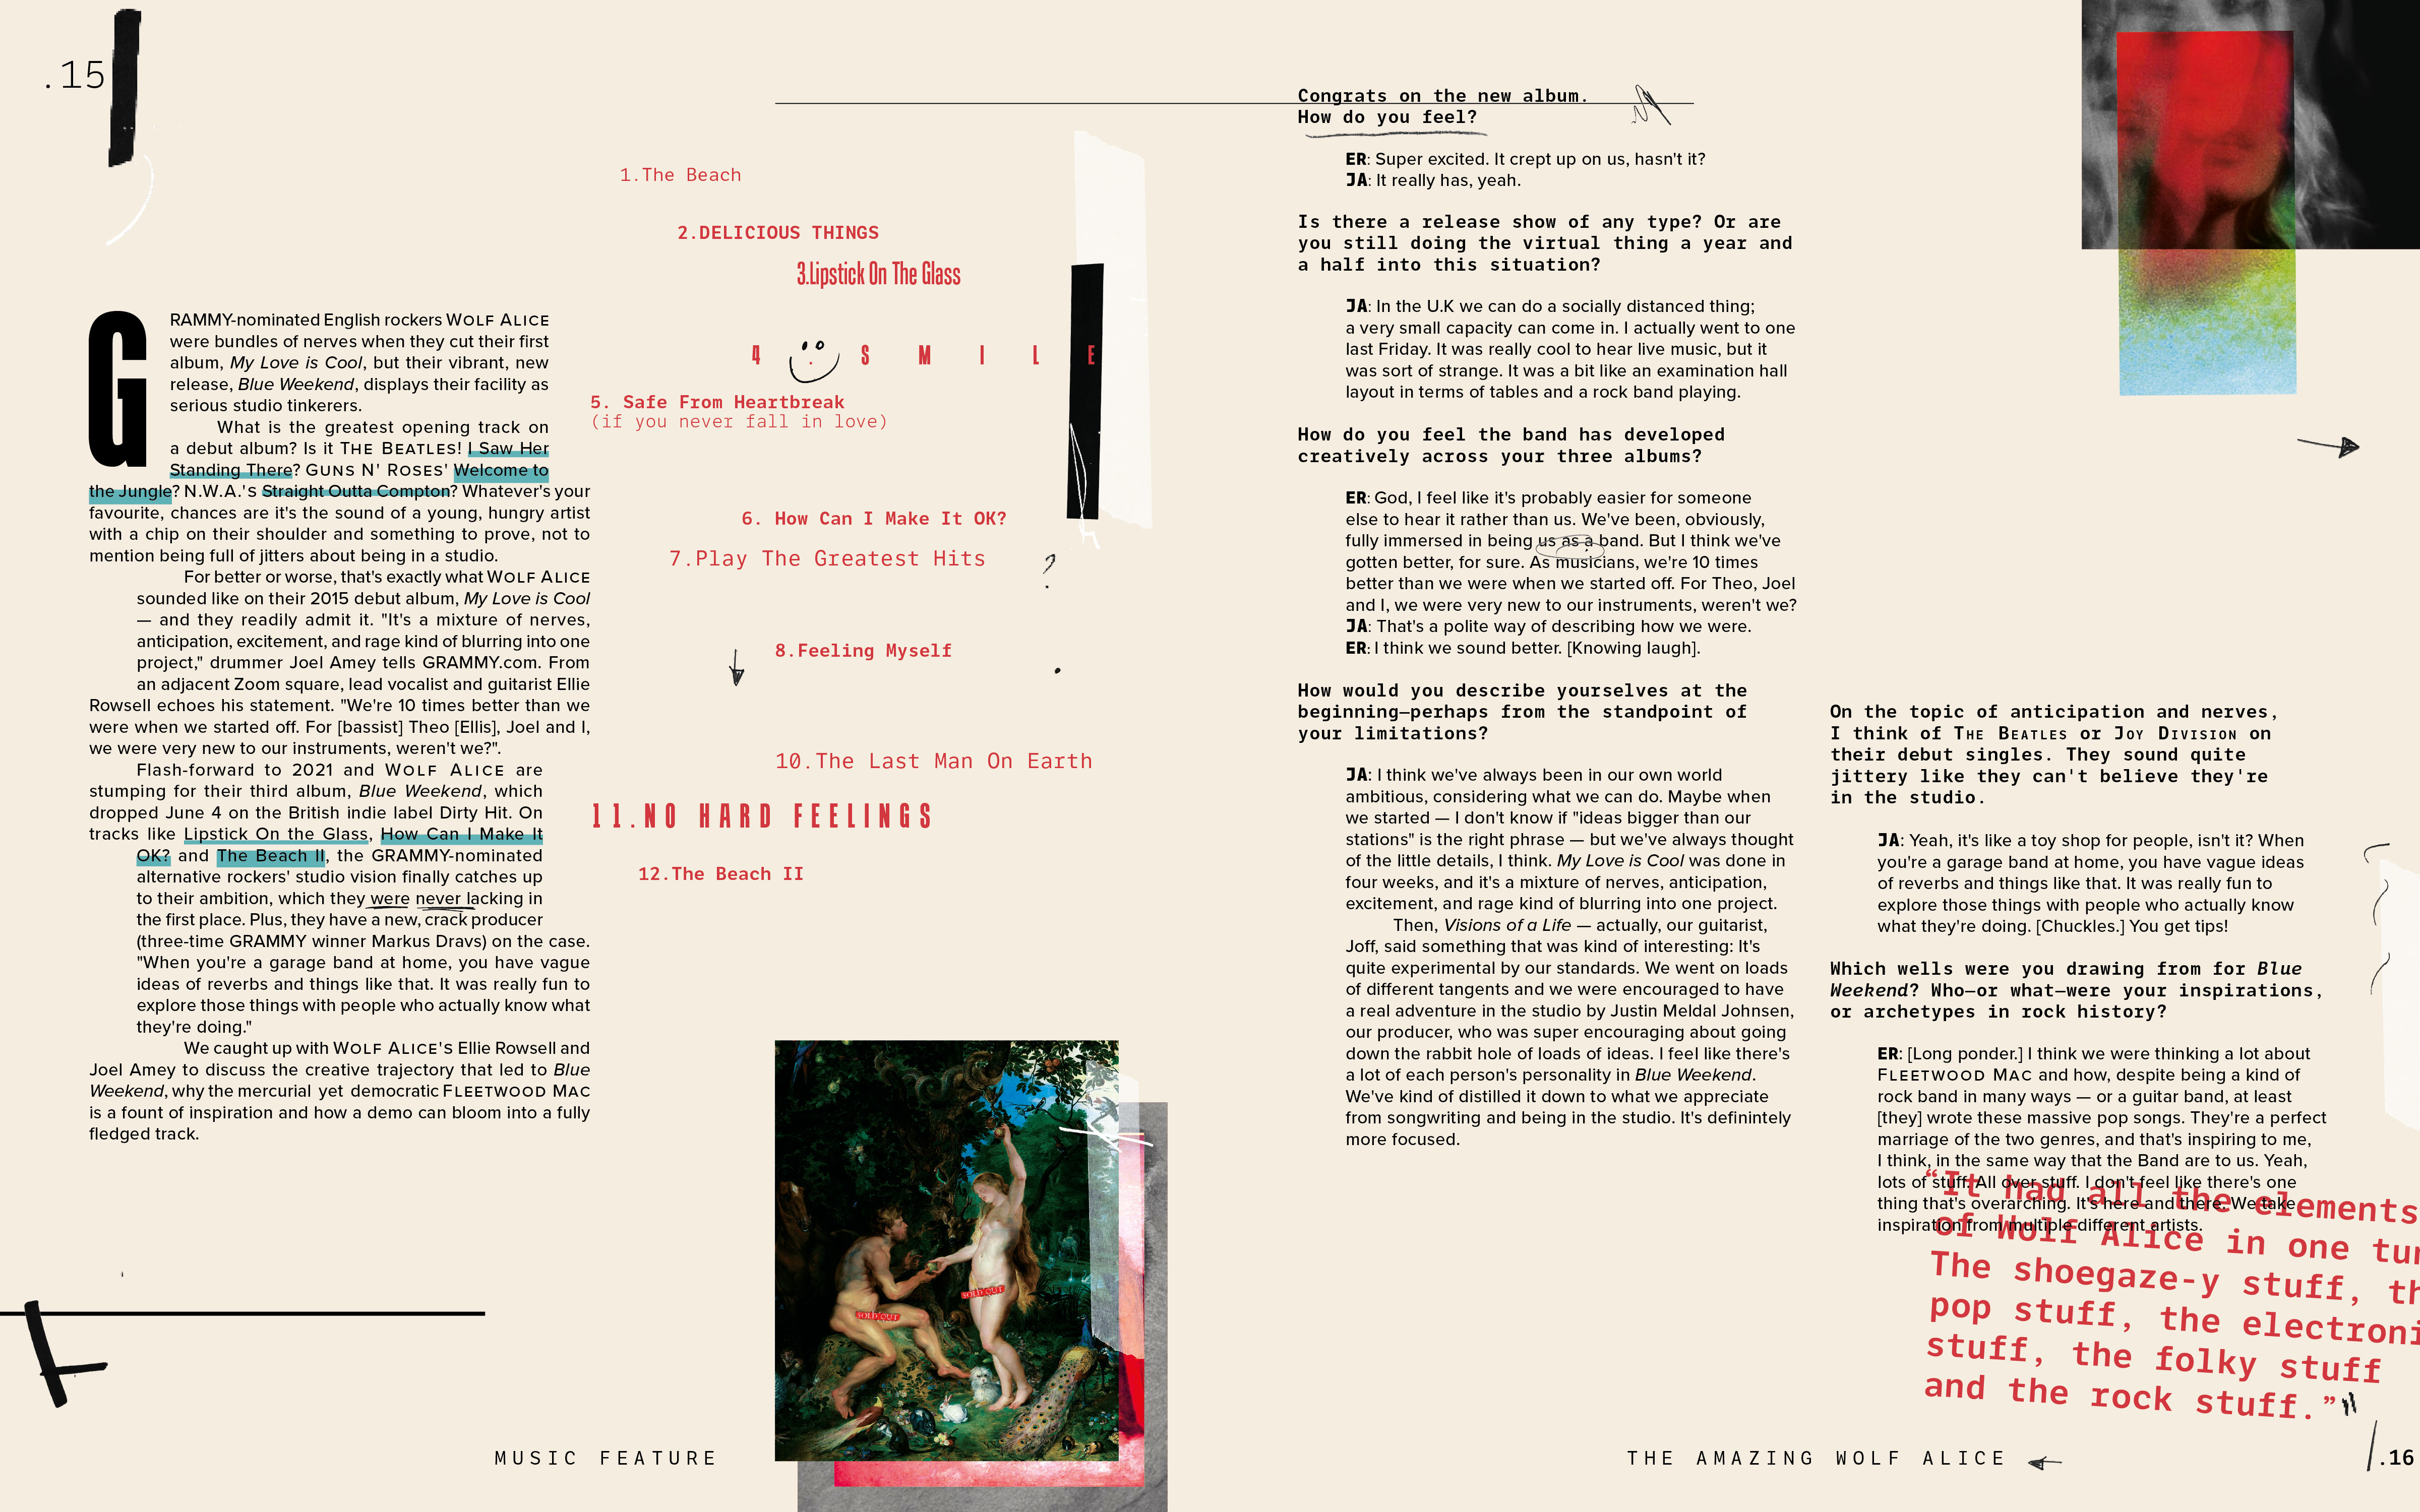 BA Design for Publishing work by Chloe Leeder showing a feature spread with a track list and interview, with accompanying playful image content.